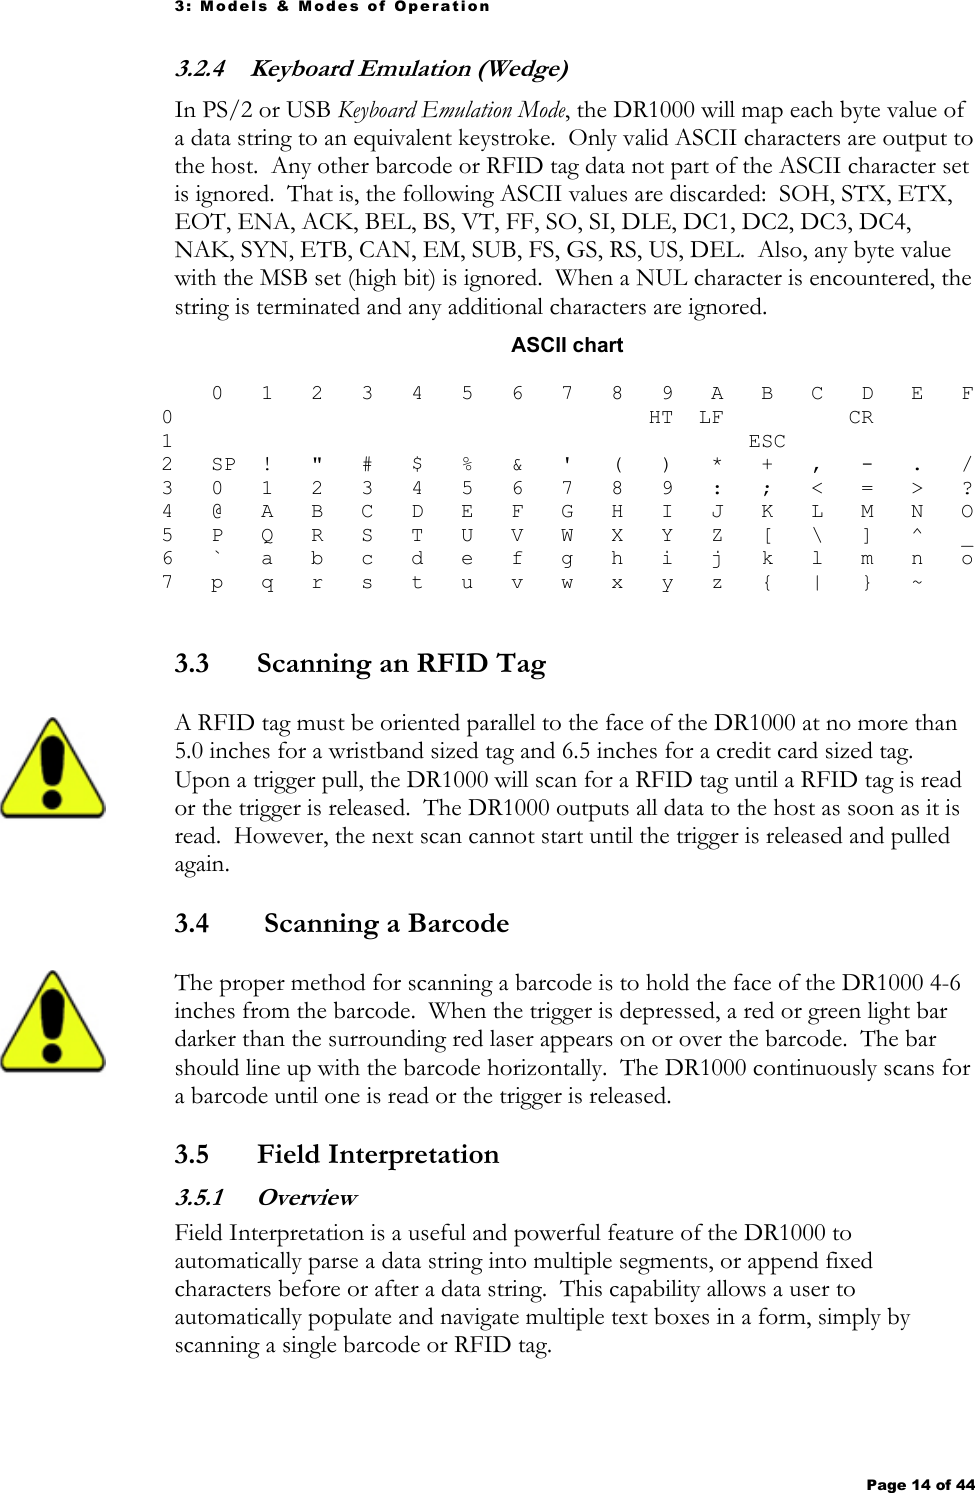 3: Models &amp; Modes of Operation Page 14 of 44   3.2.4 Keyboard Emulation (Wedge) In PS/2 or USB Keyboard Emulation Mode, the DR1000 will map each byte value of a data string to an equivalent keystroke.  Only valid ASCII characters are output to the host.  Any other barcode or RFID tag data not part of the ASCII character set is ignored.  That is, the following ASCII values are discarded:  SOH, STX, ETX, EOT, ENA, ACK, BEL, BS, VT, FF, SO, SI, DLE, DC1, DC2, DC3, DC4, NAK, SYN, ETB, CAN, EM, SUB, FS, GS, RS, US, DEL.  Also, any byte value with the MSB set (high bit) is ignored.  When a NUL character is encountered, the string is terminated and any additional characters are ignored. ASCII chart     0   1   2   3   4   5   6   7   8   9   A   B   C   D   E   F 0                                      HT  LF          CR         1                                              ESC                2   SP  !   &quot;   #   $   %   &amp;   &apos;   (   )   *   +   ,   -   .   / 3   0   1   2   3   4   5   6   7   8   9   :   ;   &lt;   =   &gt;   ? 4   @   A   B   C   D   E   F   G   H   I   J   K   L   M   N   O 5   P   Q   R   S   T   U   V   W   X   Y   Z   [   \   ]   ^   _ 6   `   a   b   c   d   e   f   g   h   i   j   k   l   m   n   o 7   p   q   r   s   t   u   v   w   x   y   z   {   |   }   ~      3.3 Scanning an RFID Tag A RFID tag must be oriented parallel to the face of the DR1000 at no more than 5.0 inches for a wristband sized tag and 6.5 inches for a credit card sized tag.  Upon a trigger pull, the DR1000 will scan for a RFID tag until a RFID tag is read or the trigger is released.  The DR1000 outputs all data to the host as soon as it is read.  However, the next scan cannot start until the trigger is released and pulled again.    3.4  Scanning a Barcode The proper method for scanning a barcode is to hold the face of the DR1000 4-6 inches from the barcode.  When the trigger is depressed, a red or green light bar darker than the surrounding red laser appears on or over the barcode.  The bar should line up with the barcode horizontally.  The DR1000 continuously scans for a barcode until one is read or the trigger is released. 3.5 Field Interpretation 3.5.1  Overview Field Interpretation is a useful and powerful feature of the DR1000 to automatically parse a data string into multiple segments, or append fixed characters before or after a data string.  This capability allows a user to automatically populate and navigate multiple text boxes in a form, simply by scanning a single barcode or RFID tag.   